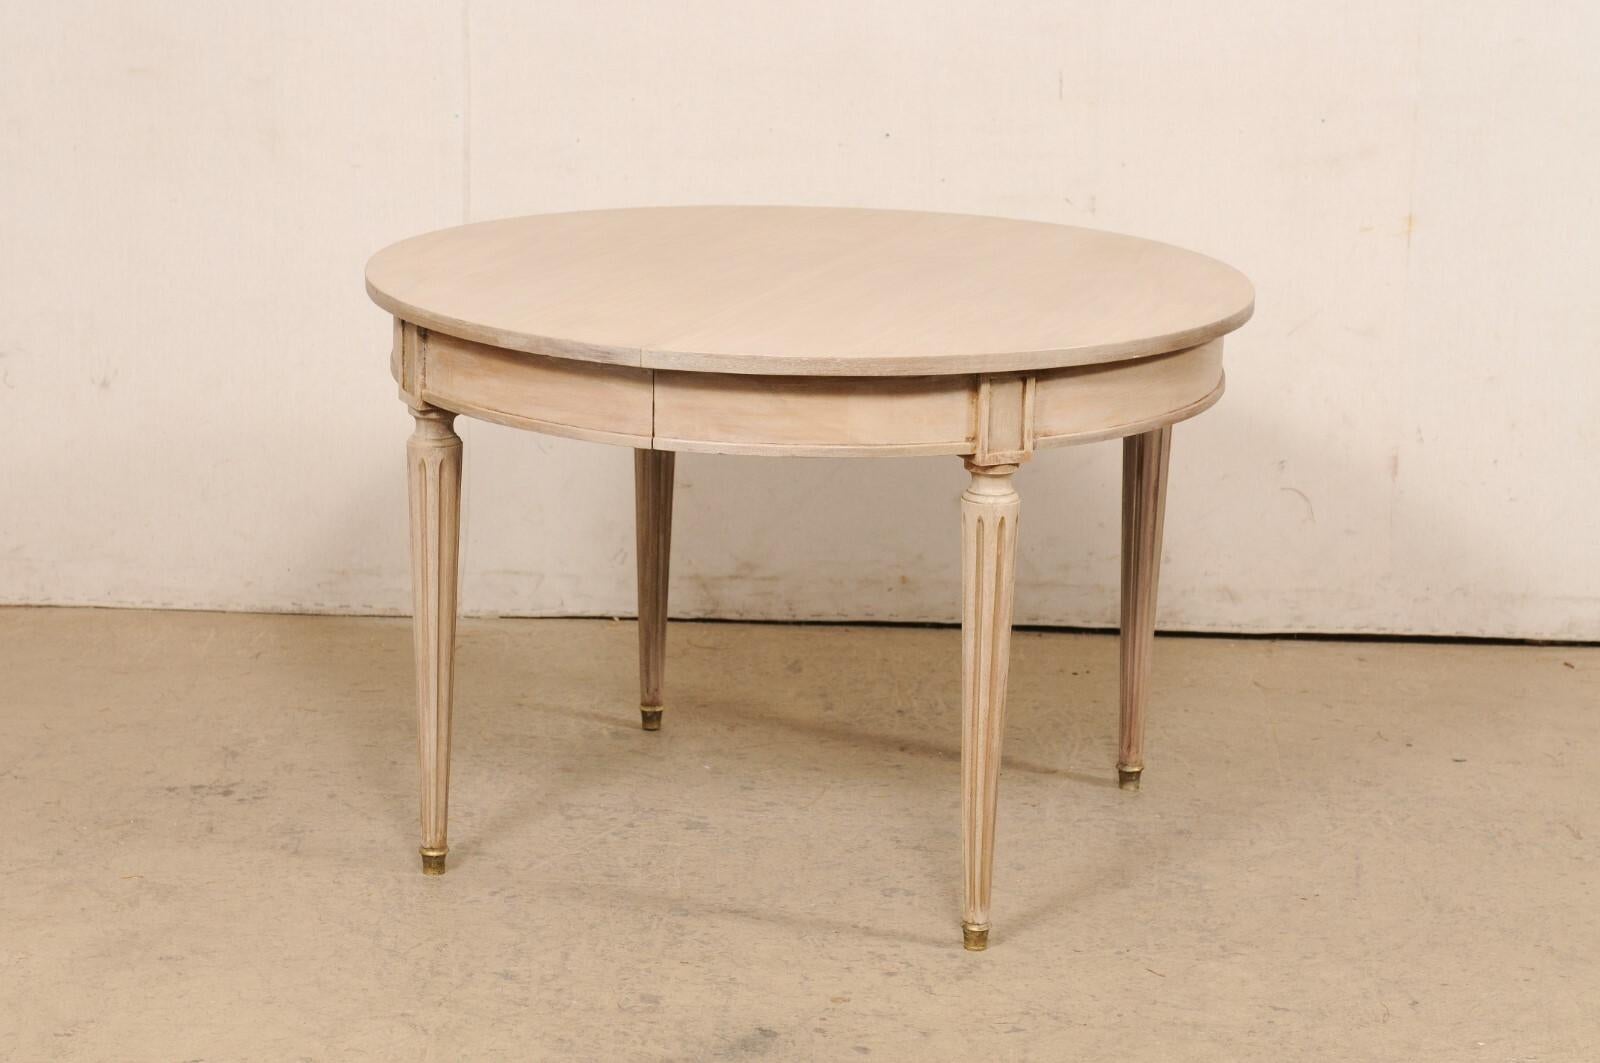 French Round Painted Wood Table w/Fluted Legs & Brass Feet, 3.5 Ft Diameter For Sale 1